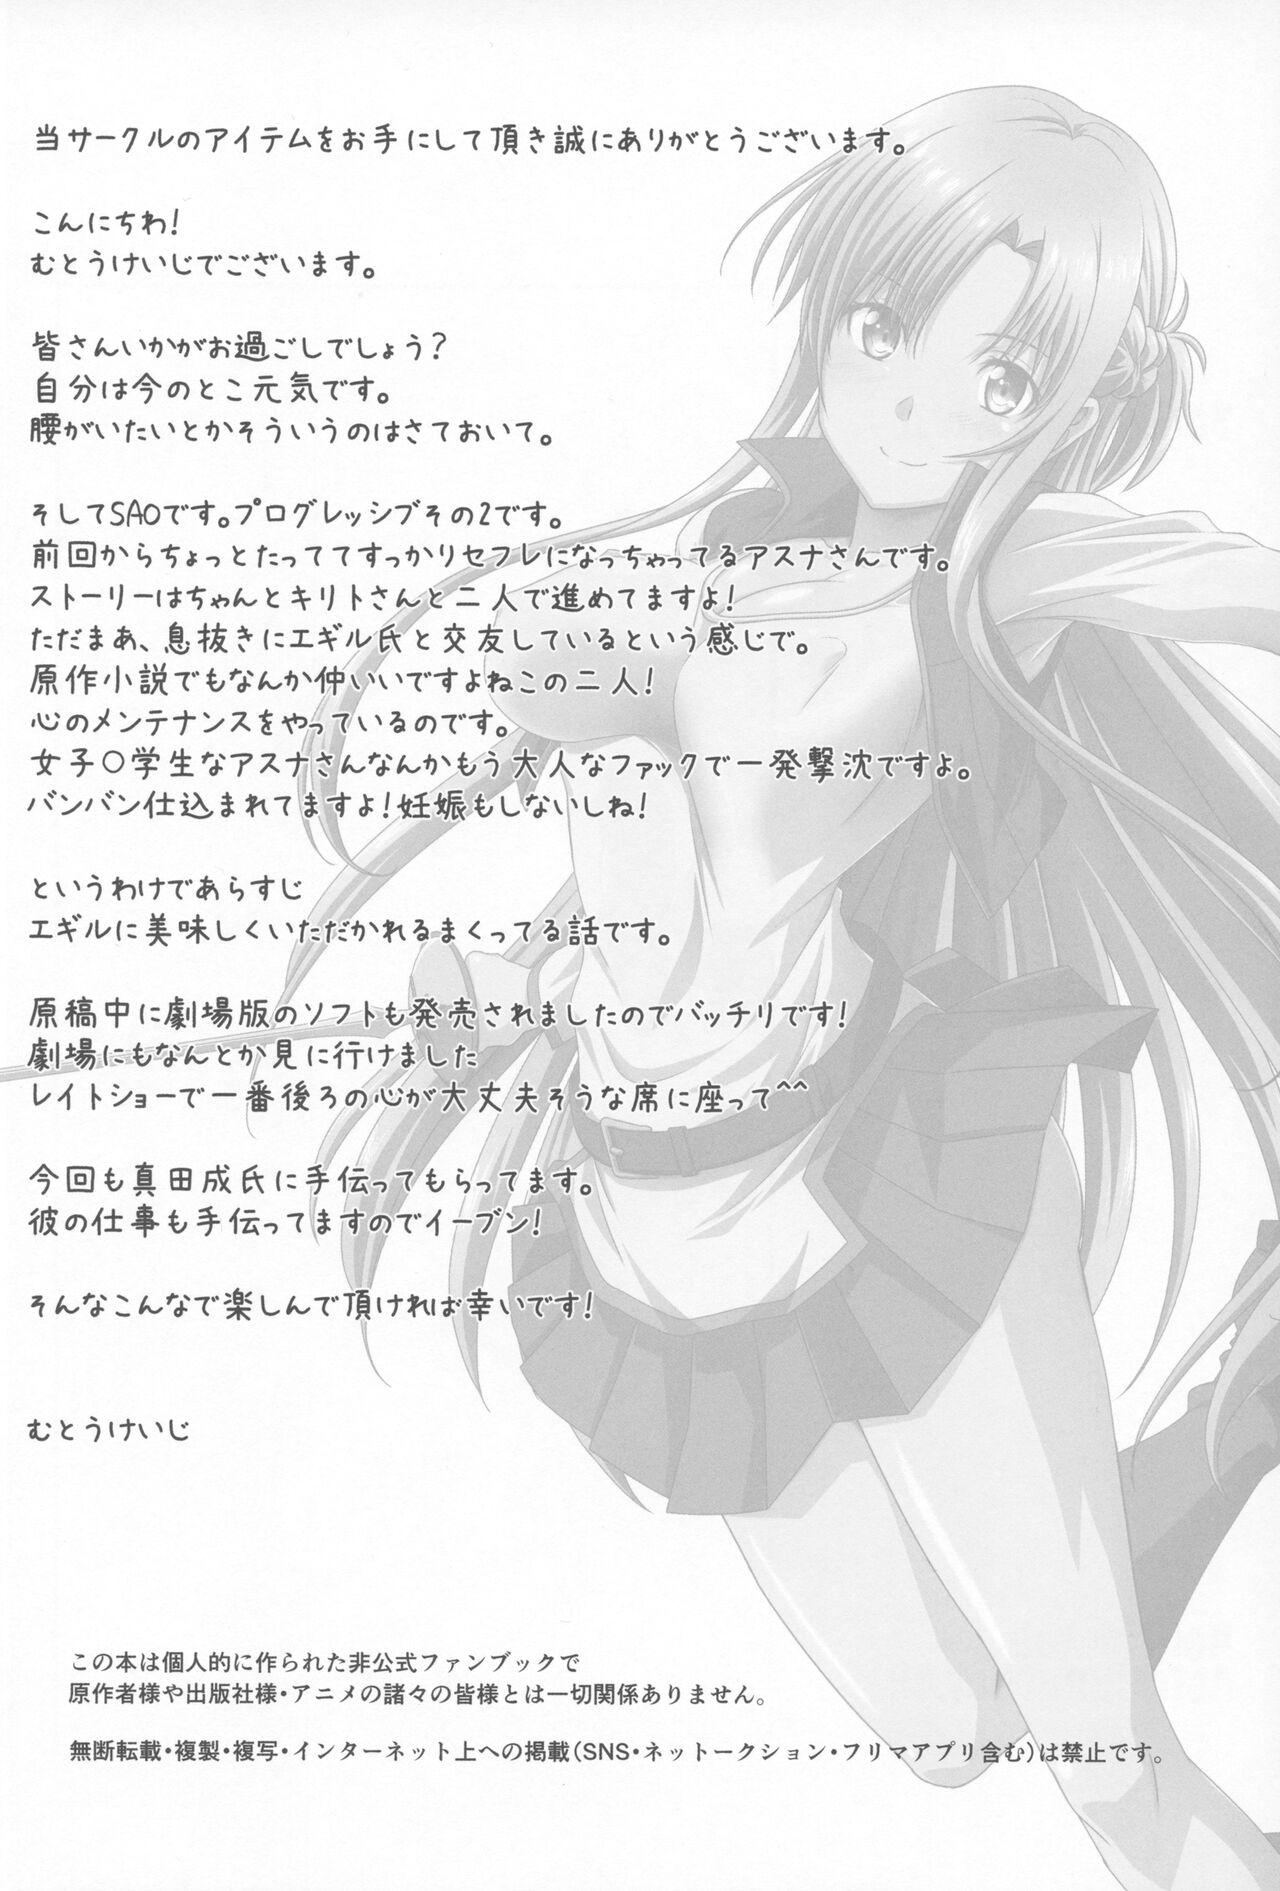 Gayporn Astral Bout Ver. 45 - Sword art online Class - Page 3